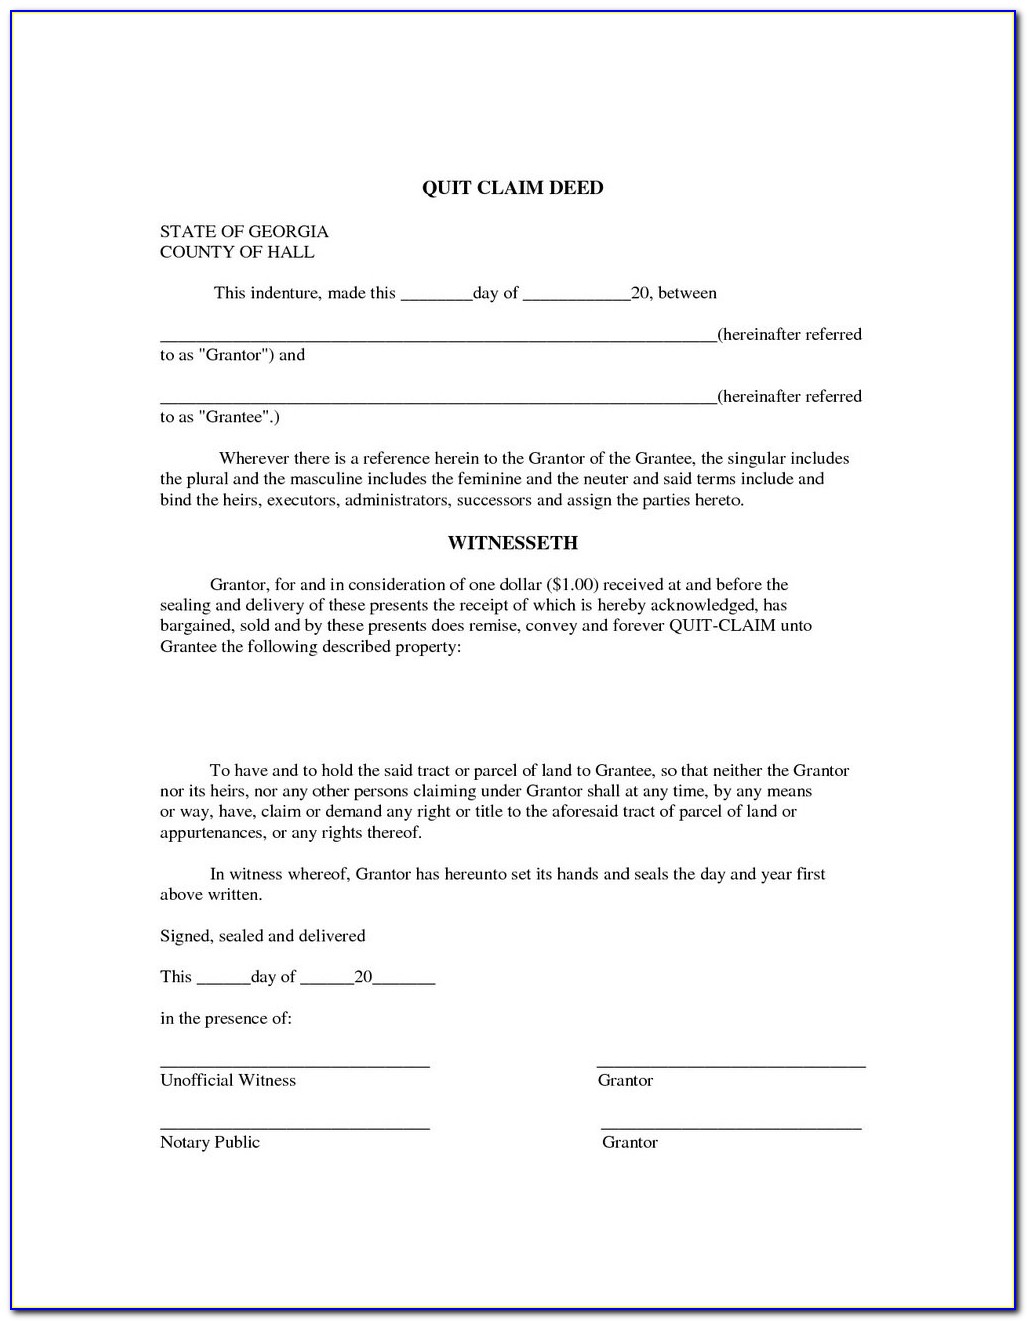 Free Quit Claim Deed Form